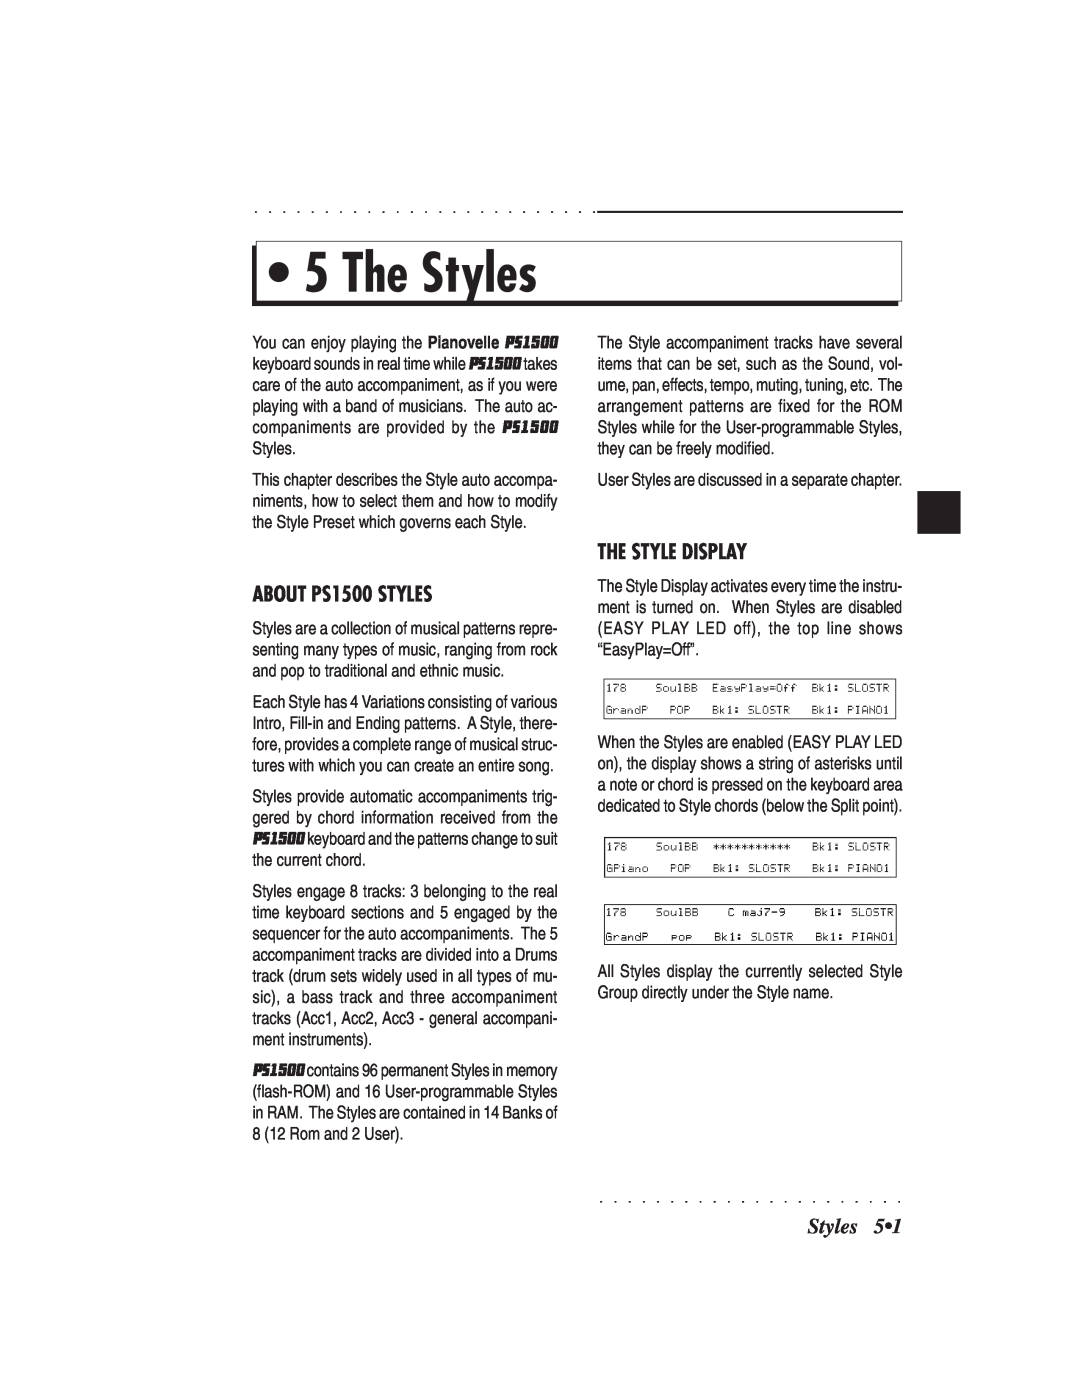 IBM owner manual The Styles, ABOUT PS1500 STYLES, The Style Display 